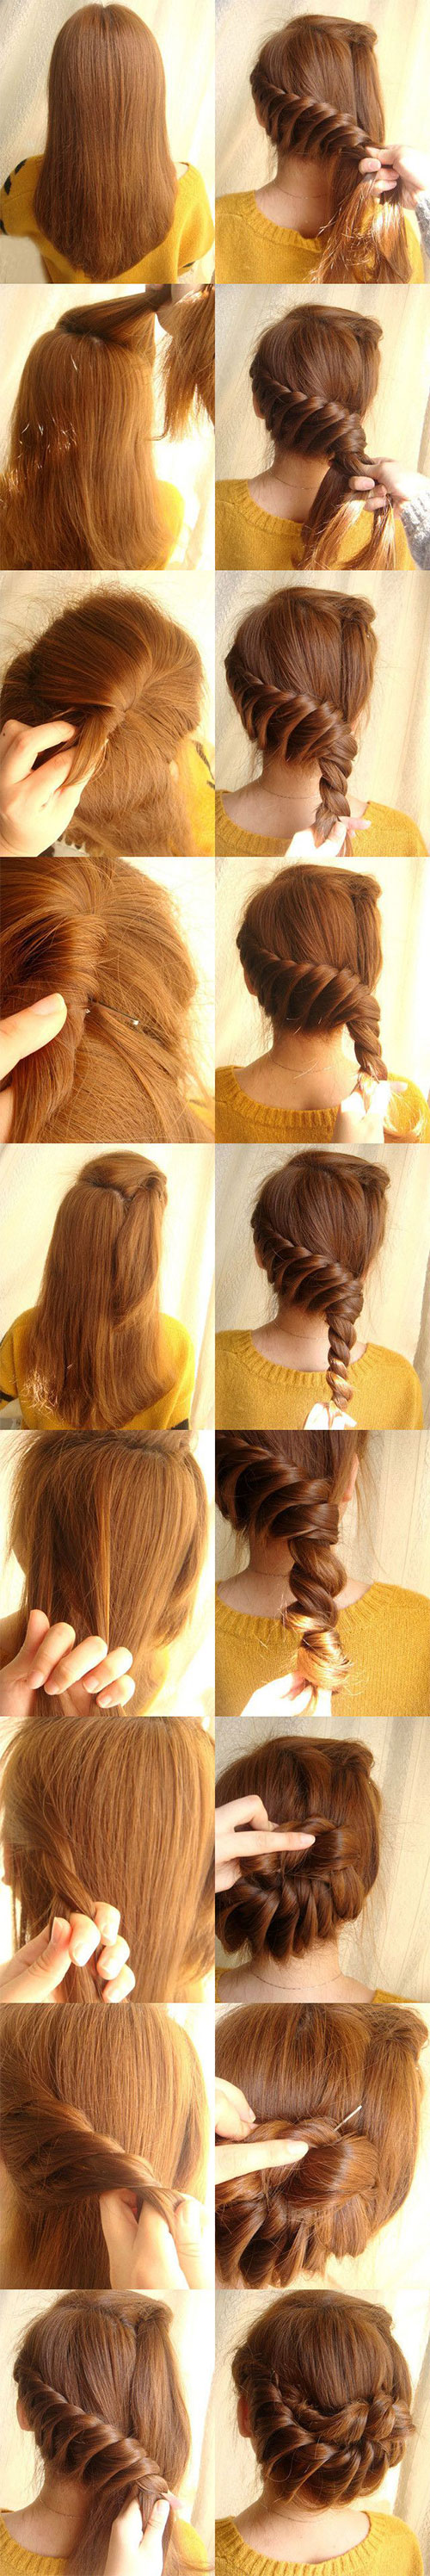 20+ Easy Step By Step Summer Braids Style Tutorials For ...